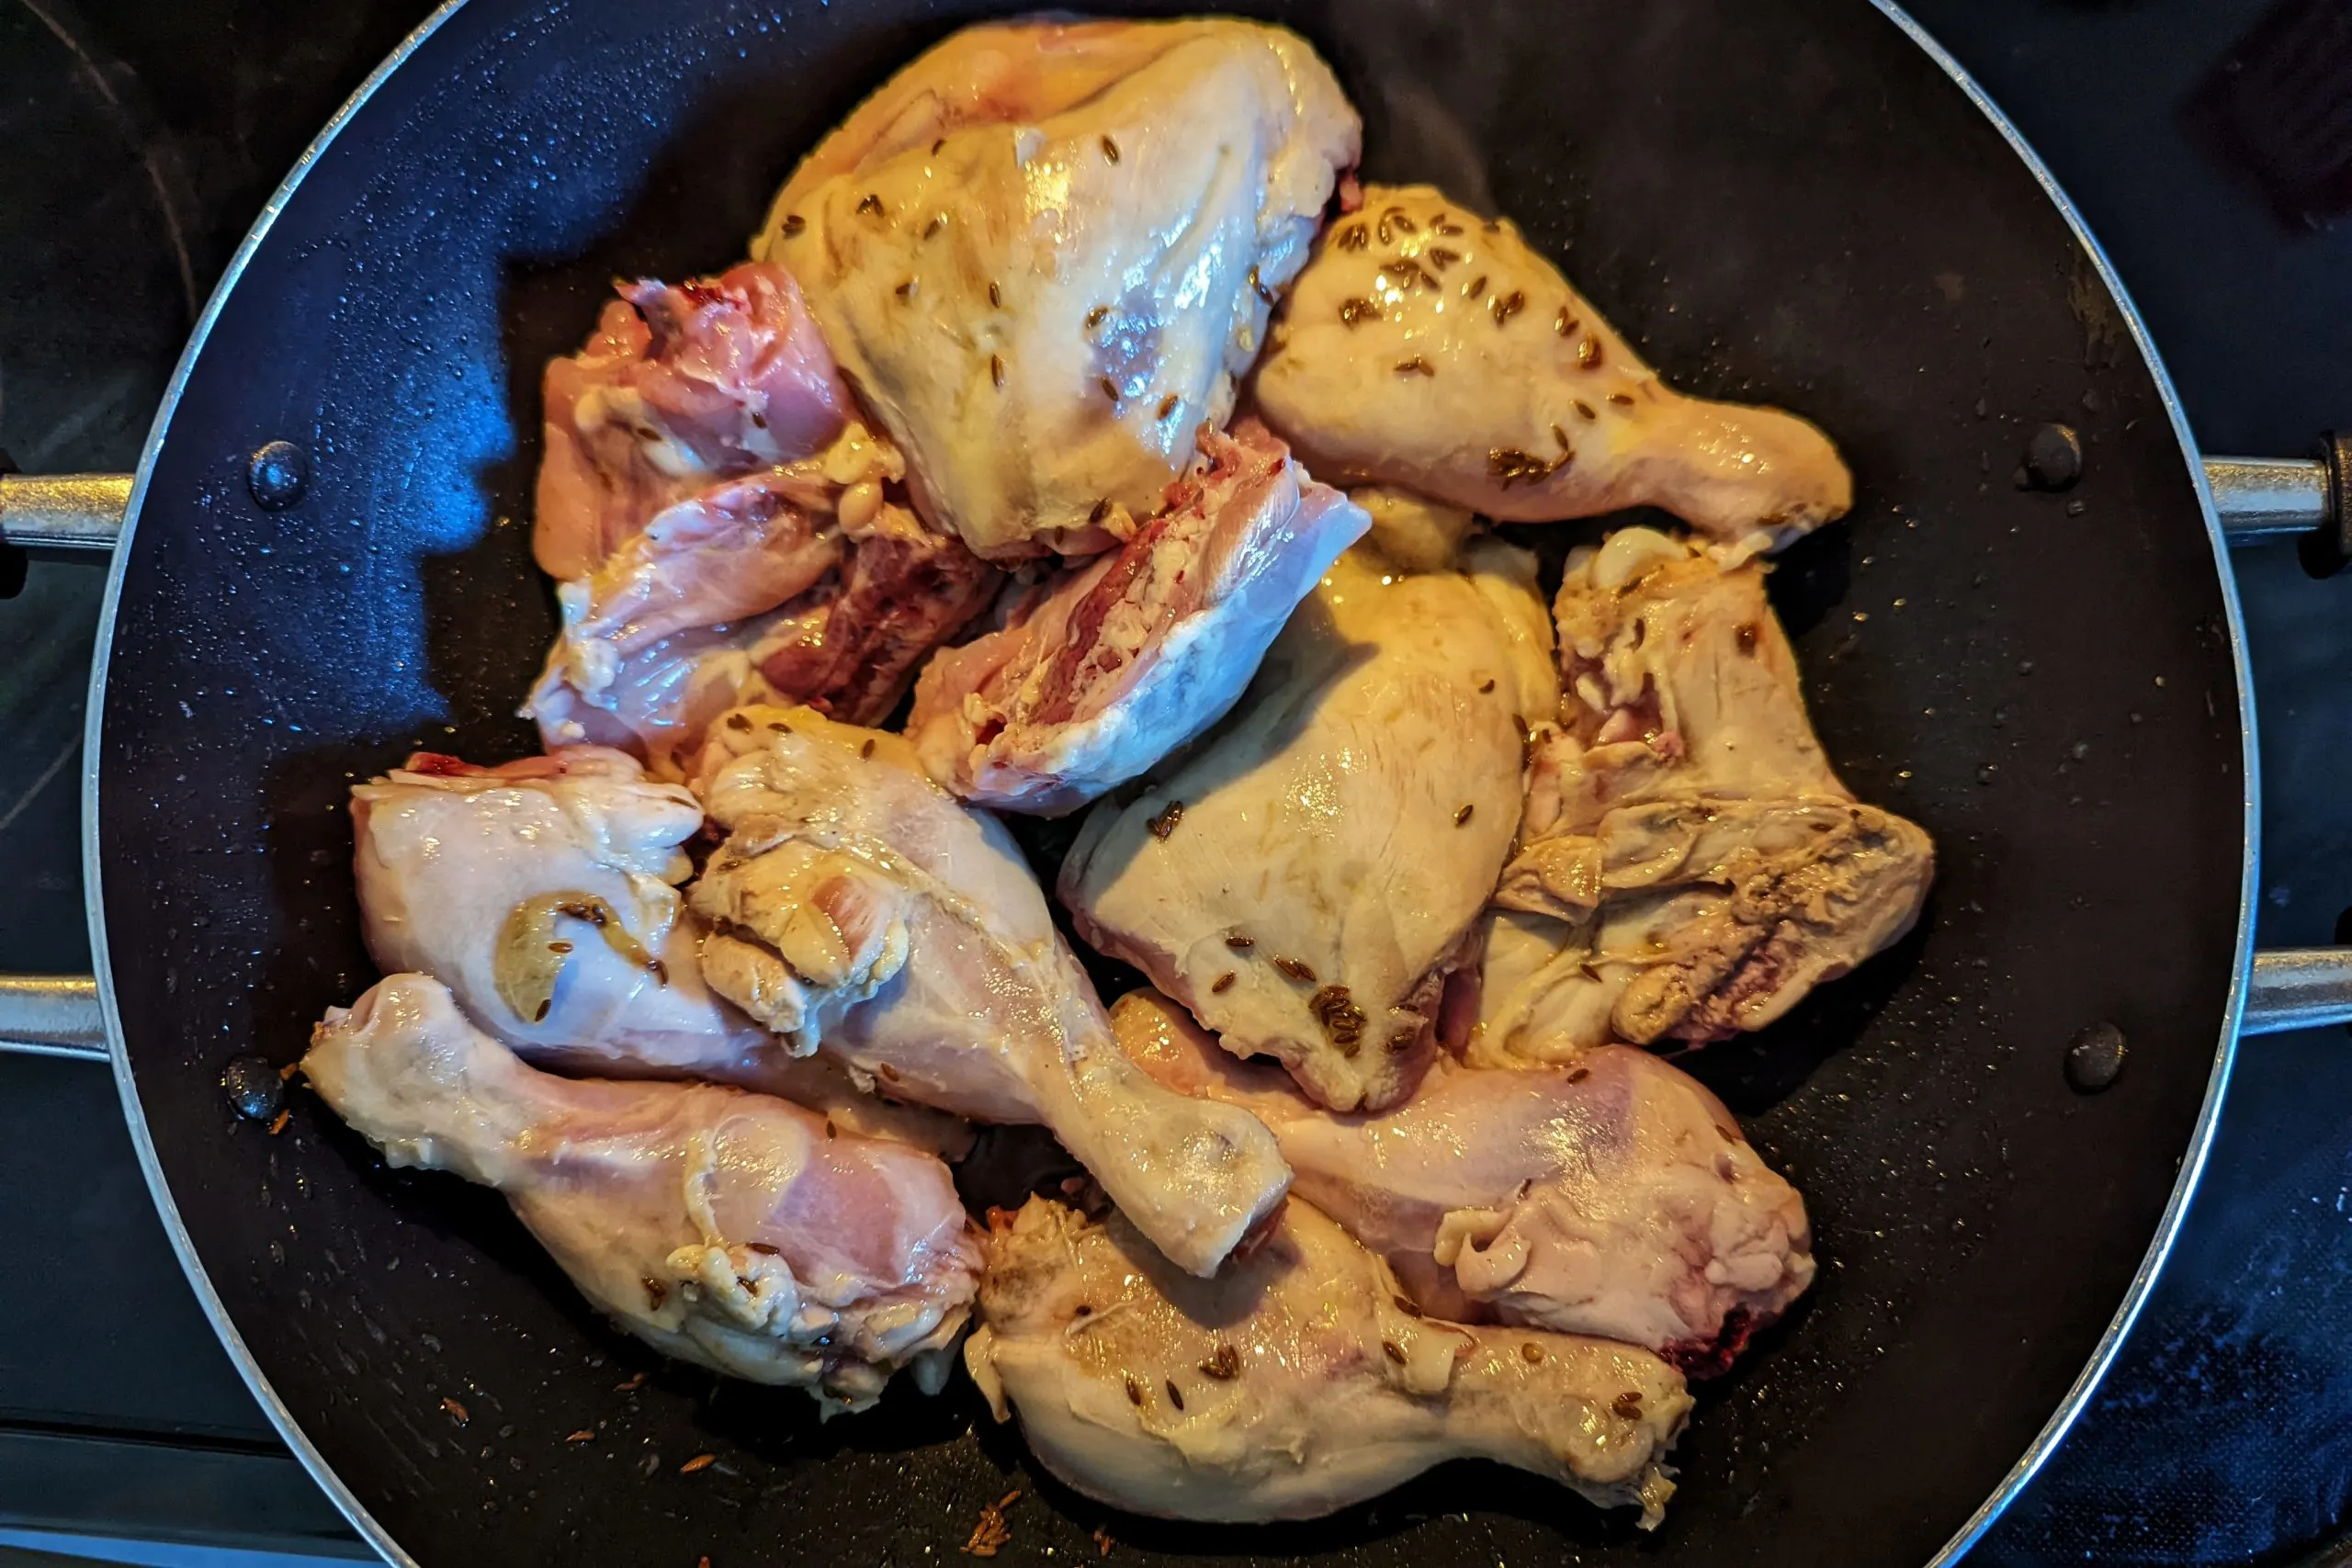 Fry the chicken pieces for Pakistani karahi.